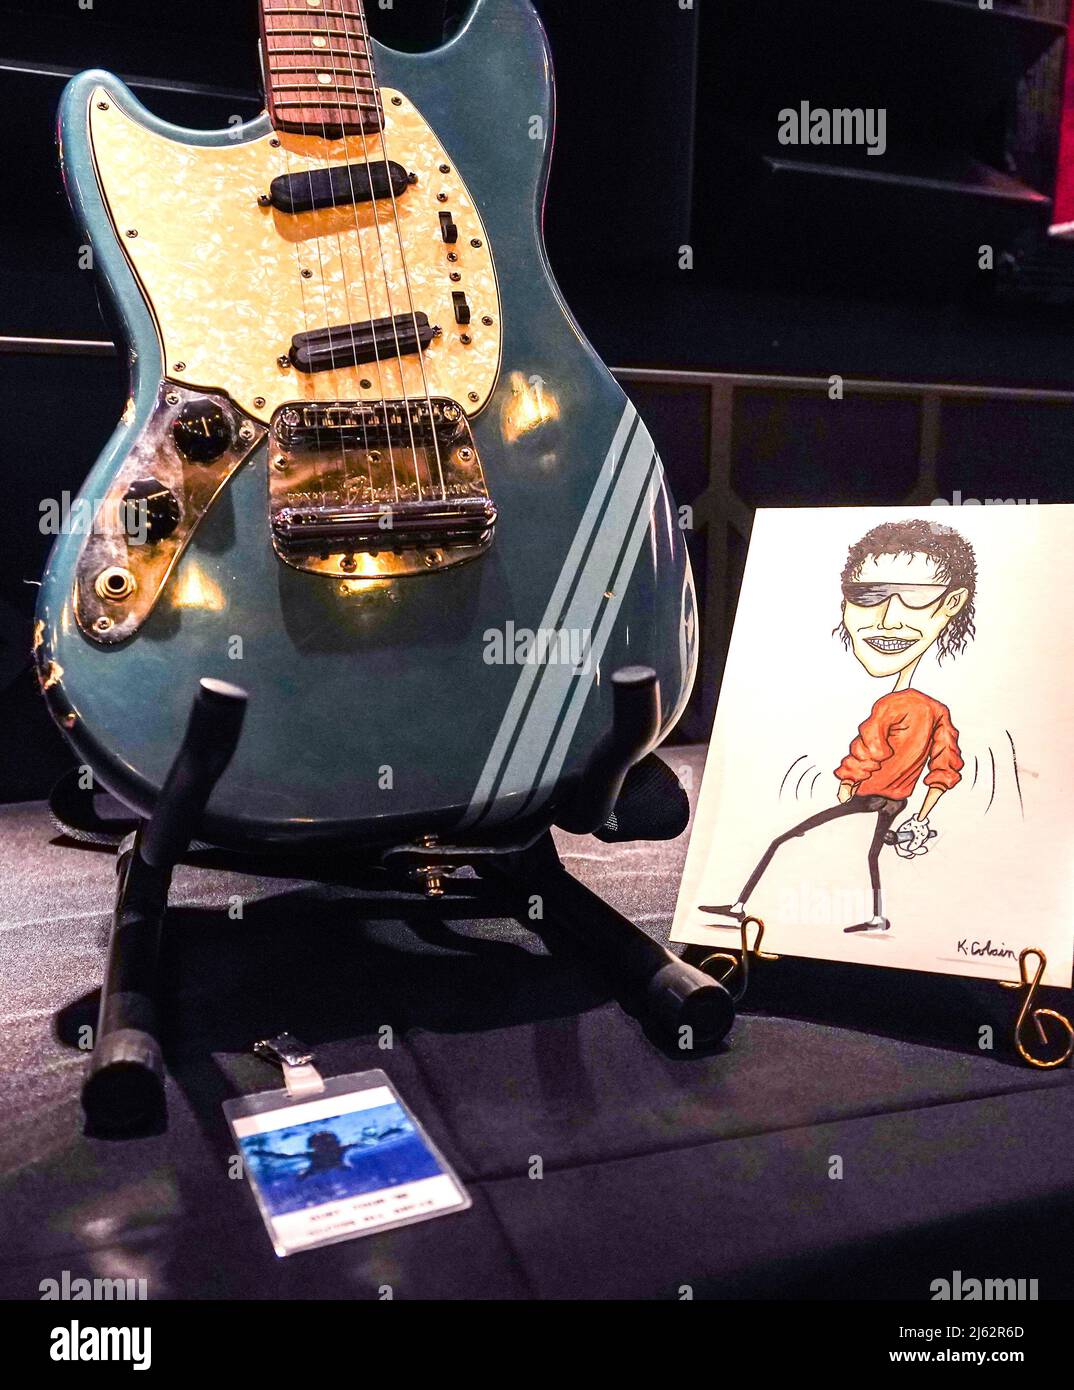 Kurt Cobain's original artwork of Michael Jackson wearing a red jacket, single white glove and sunglasses, and featuring Cobain's signature in the lower right corner, on display at the Hard Rock Cafe, London, before it goes up for auction, with an accompanying non-fungible token (NFT) included, at an estimate of 40,000 - 60,000 US dollars. Kurt Cobain's personally owned all access pass, from the 1993 Nirvana In Utero concert tour, on display at the Hard Rock Cafe, London, before it goes up for auction, at an estimate of 1,000 - 2,000 US dollars, Kurt Cobain's 1969 Fender Mustang Competition La Stock Photo